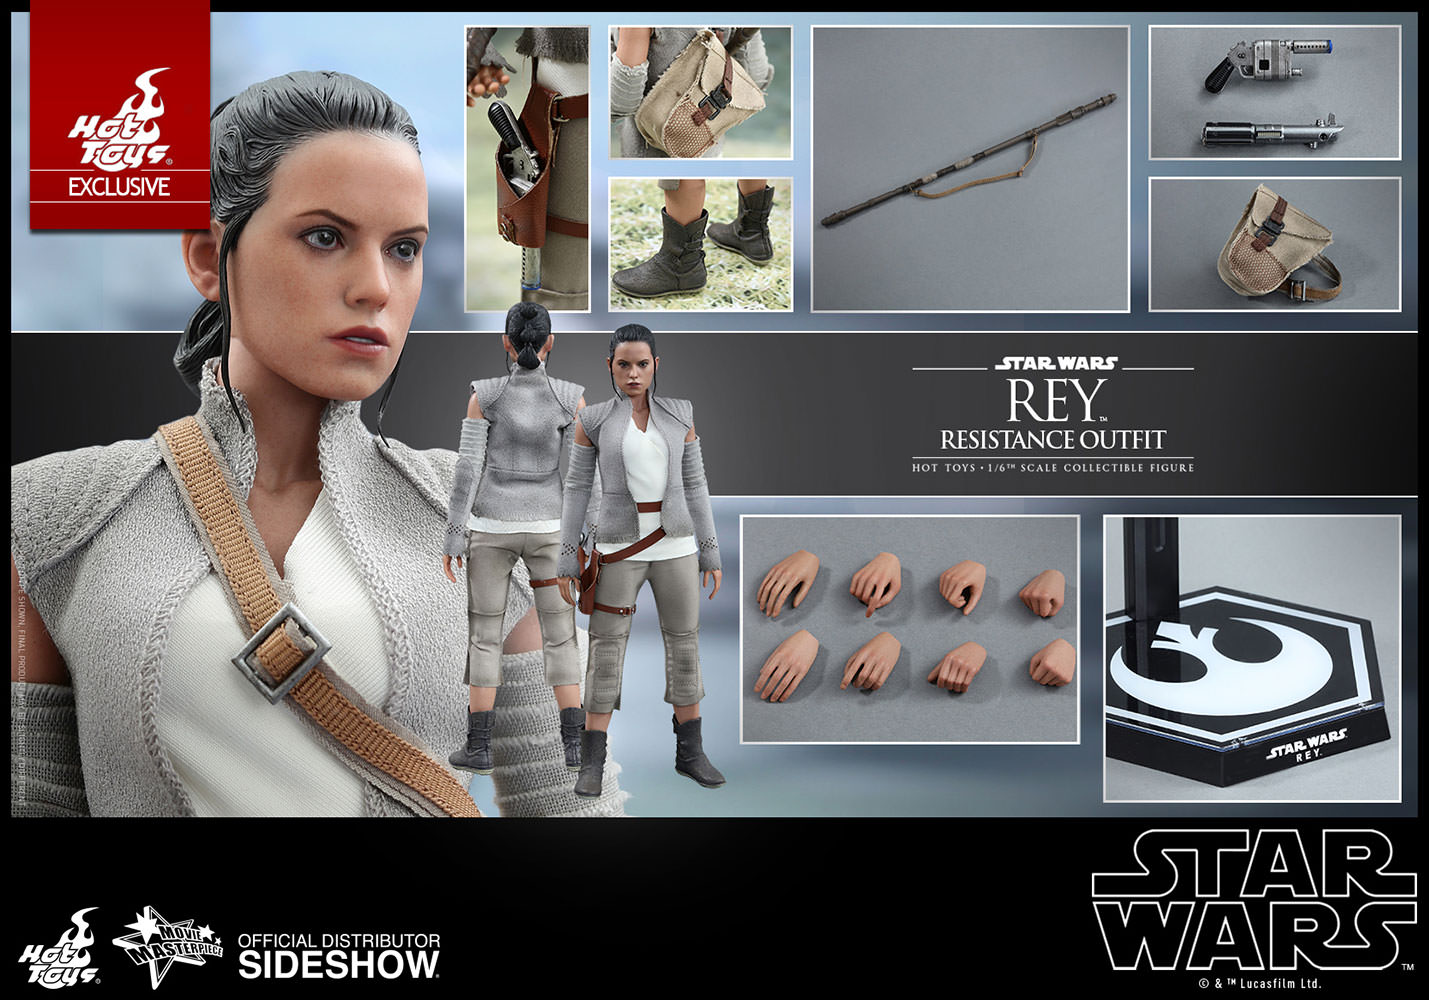 Rey (Resistance Outfit) Exclusive Sixth Scale Figure by Hot Toys